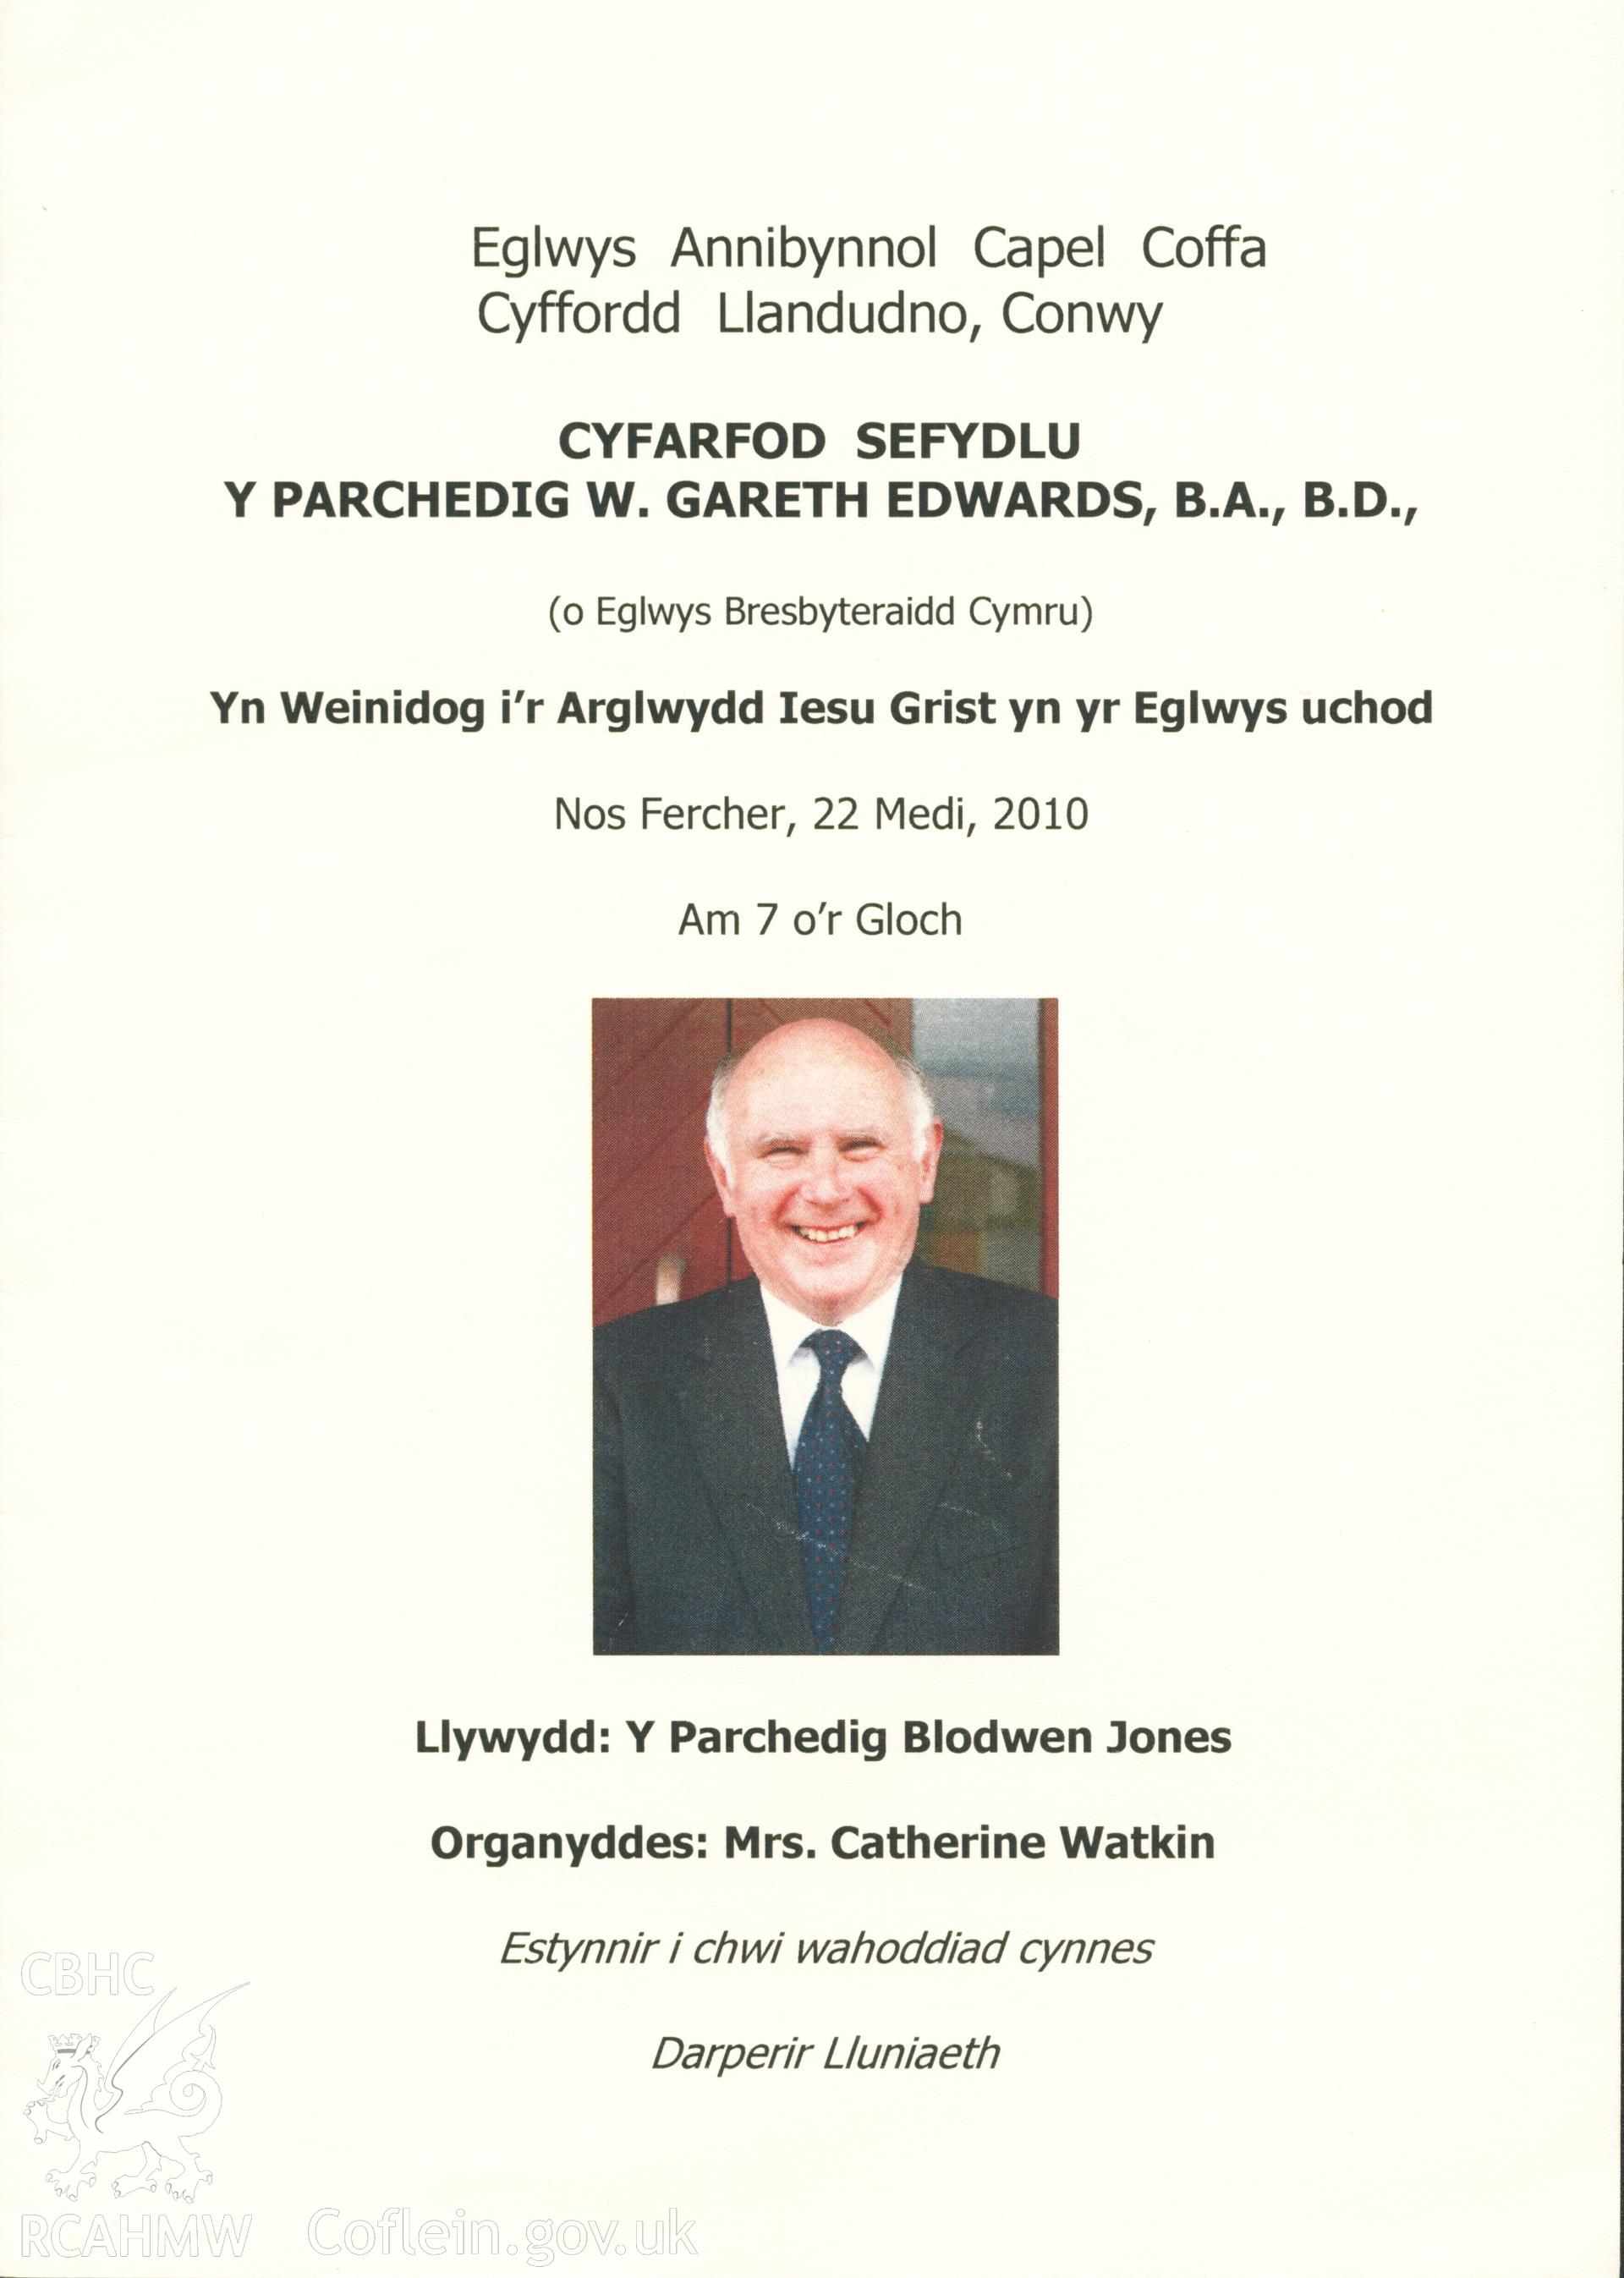 Programme printed for Minister Gareth W. Edwards establishment service 22 Sept 2010 at new chapel after leaving Peniel. Donated as part of the Digital Dissent Project.